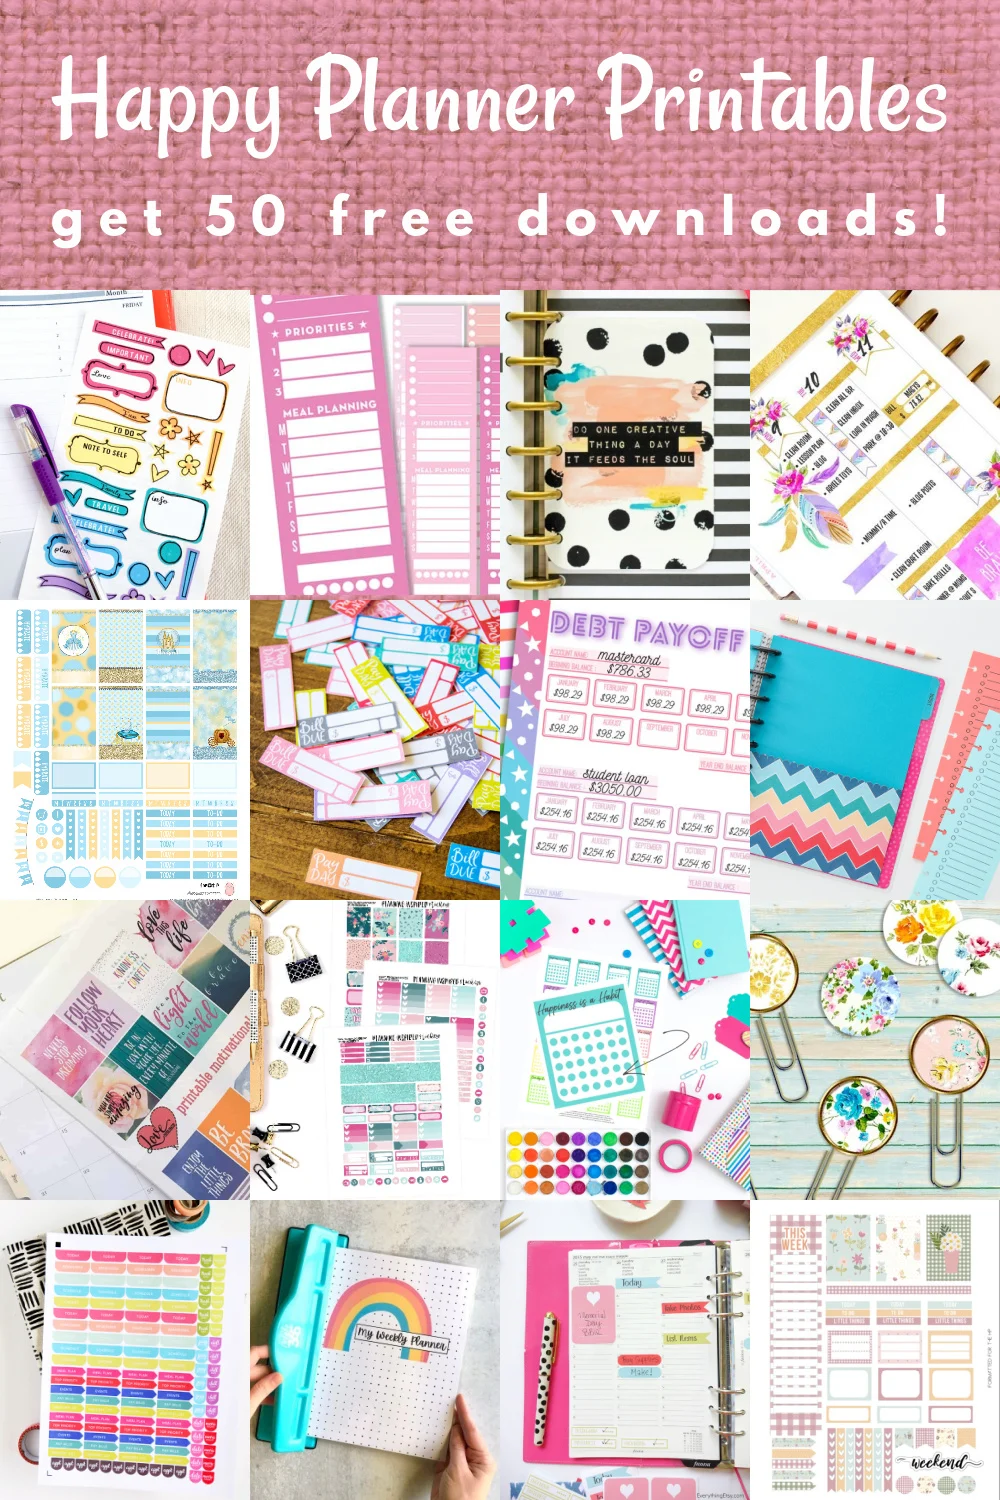 Happy Planner Free Printables That Are Incredibly Awesome - DIY Candy